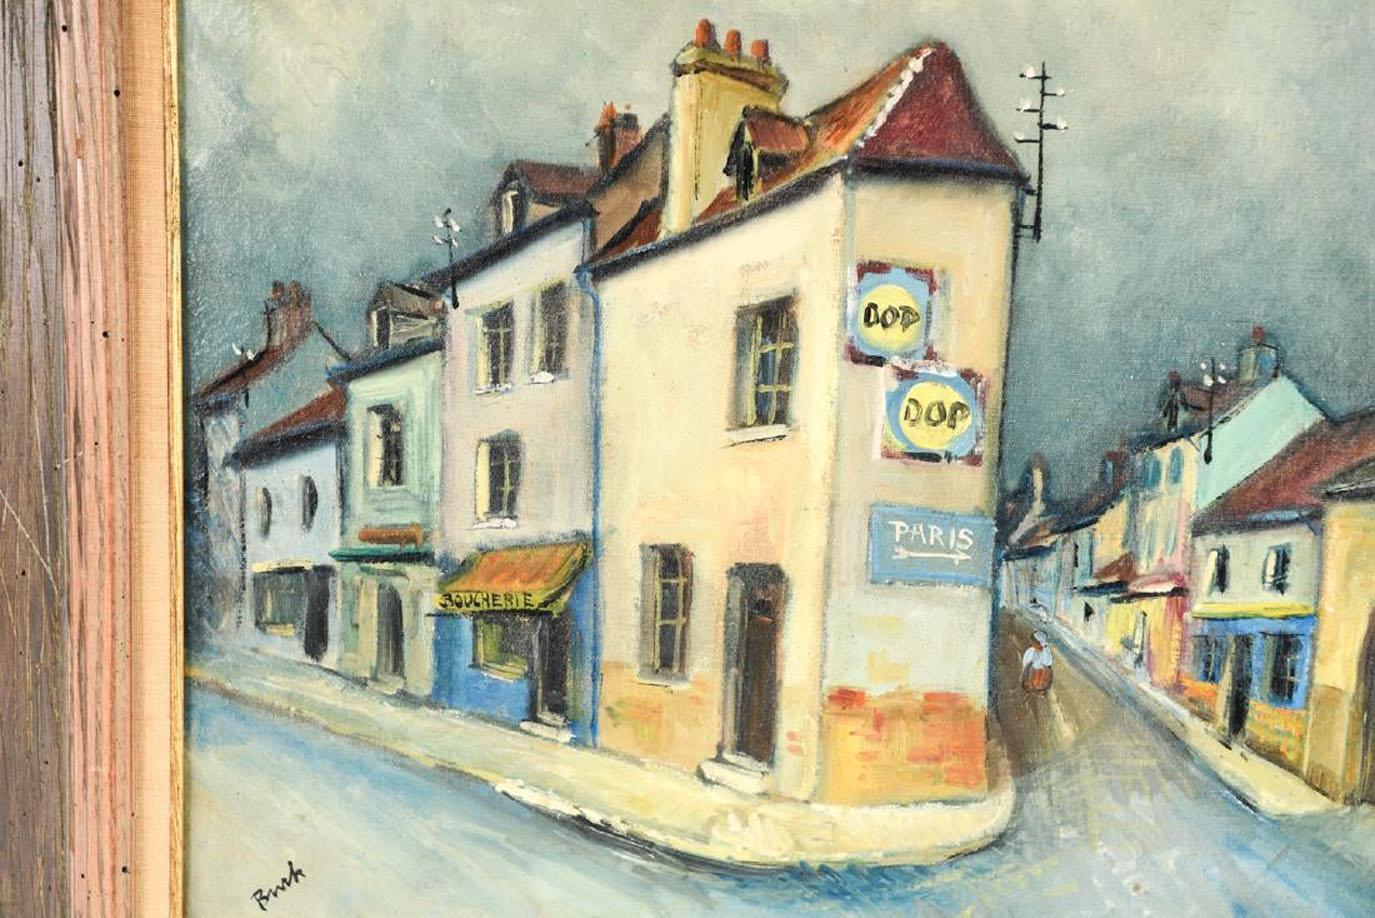 The painting depicting a French provincial town is signed by the artist George Brainerd Burr, (American 1876-1939). The scene focuses on buildings lining two streets branching away from each other. The building in the foreground has a sign